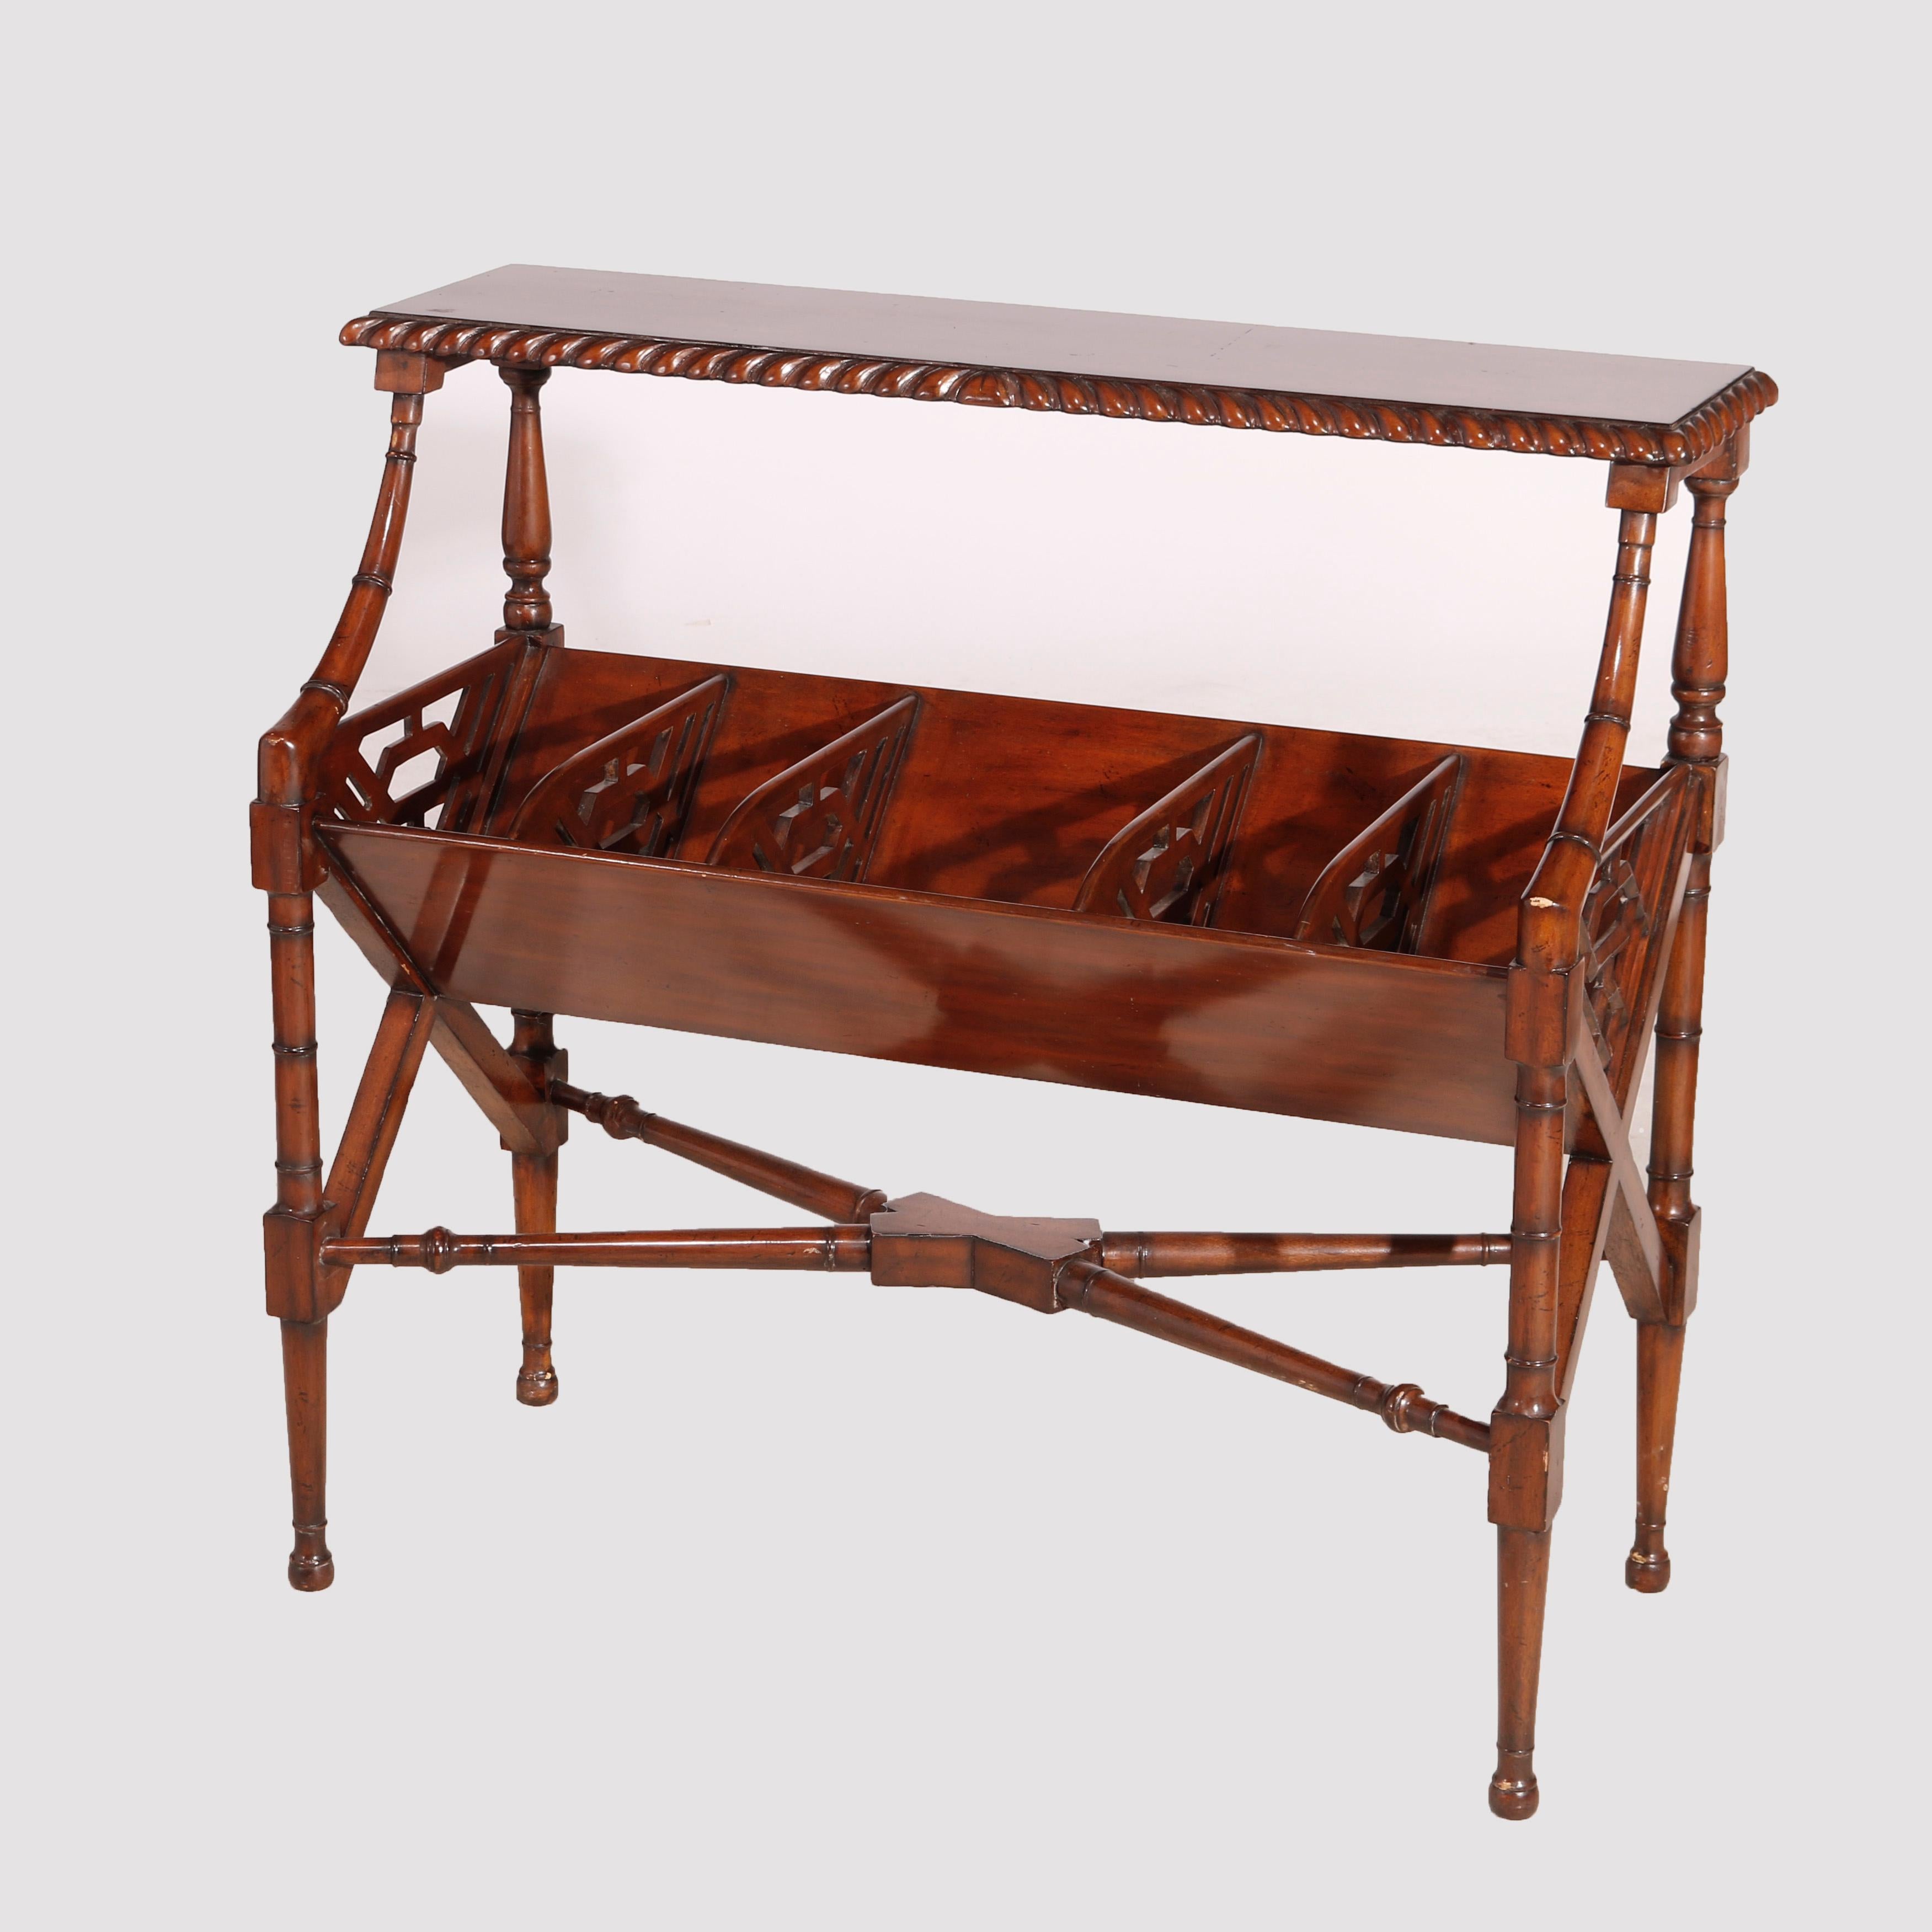 An Aesthetic style bookstand by Maitland Smith offers mahogany construction with top having rope twist border over unit with divided cradle and having bamboo form frame, identifying label as photographed, 20th century

Measures - 33.75